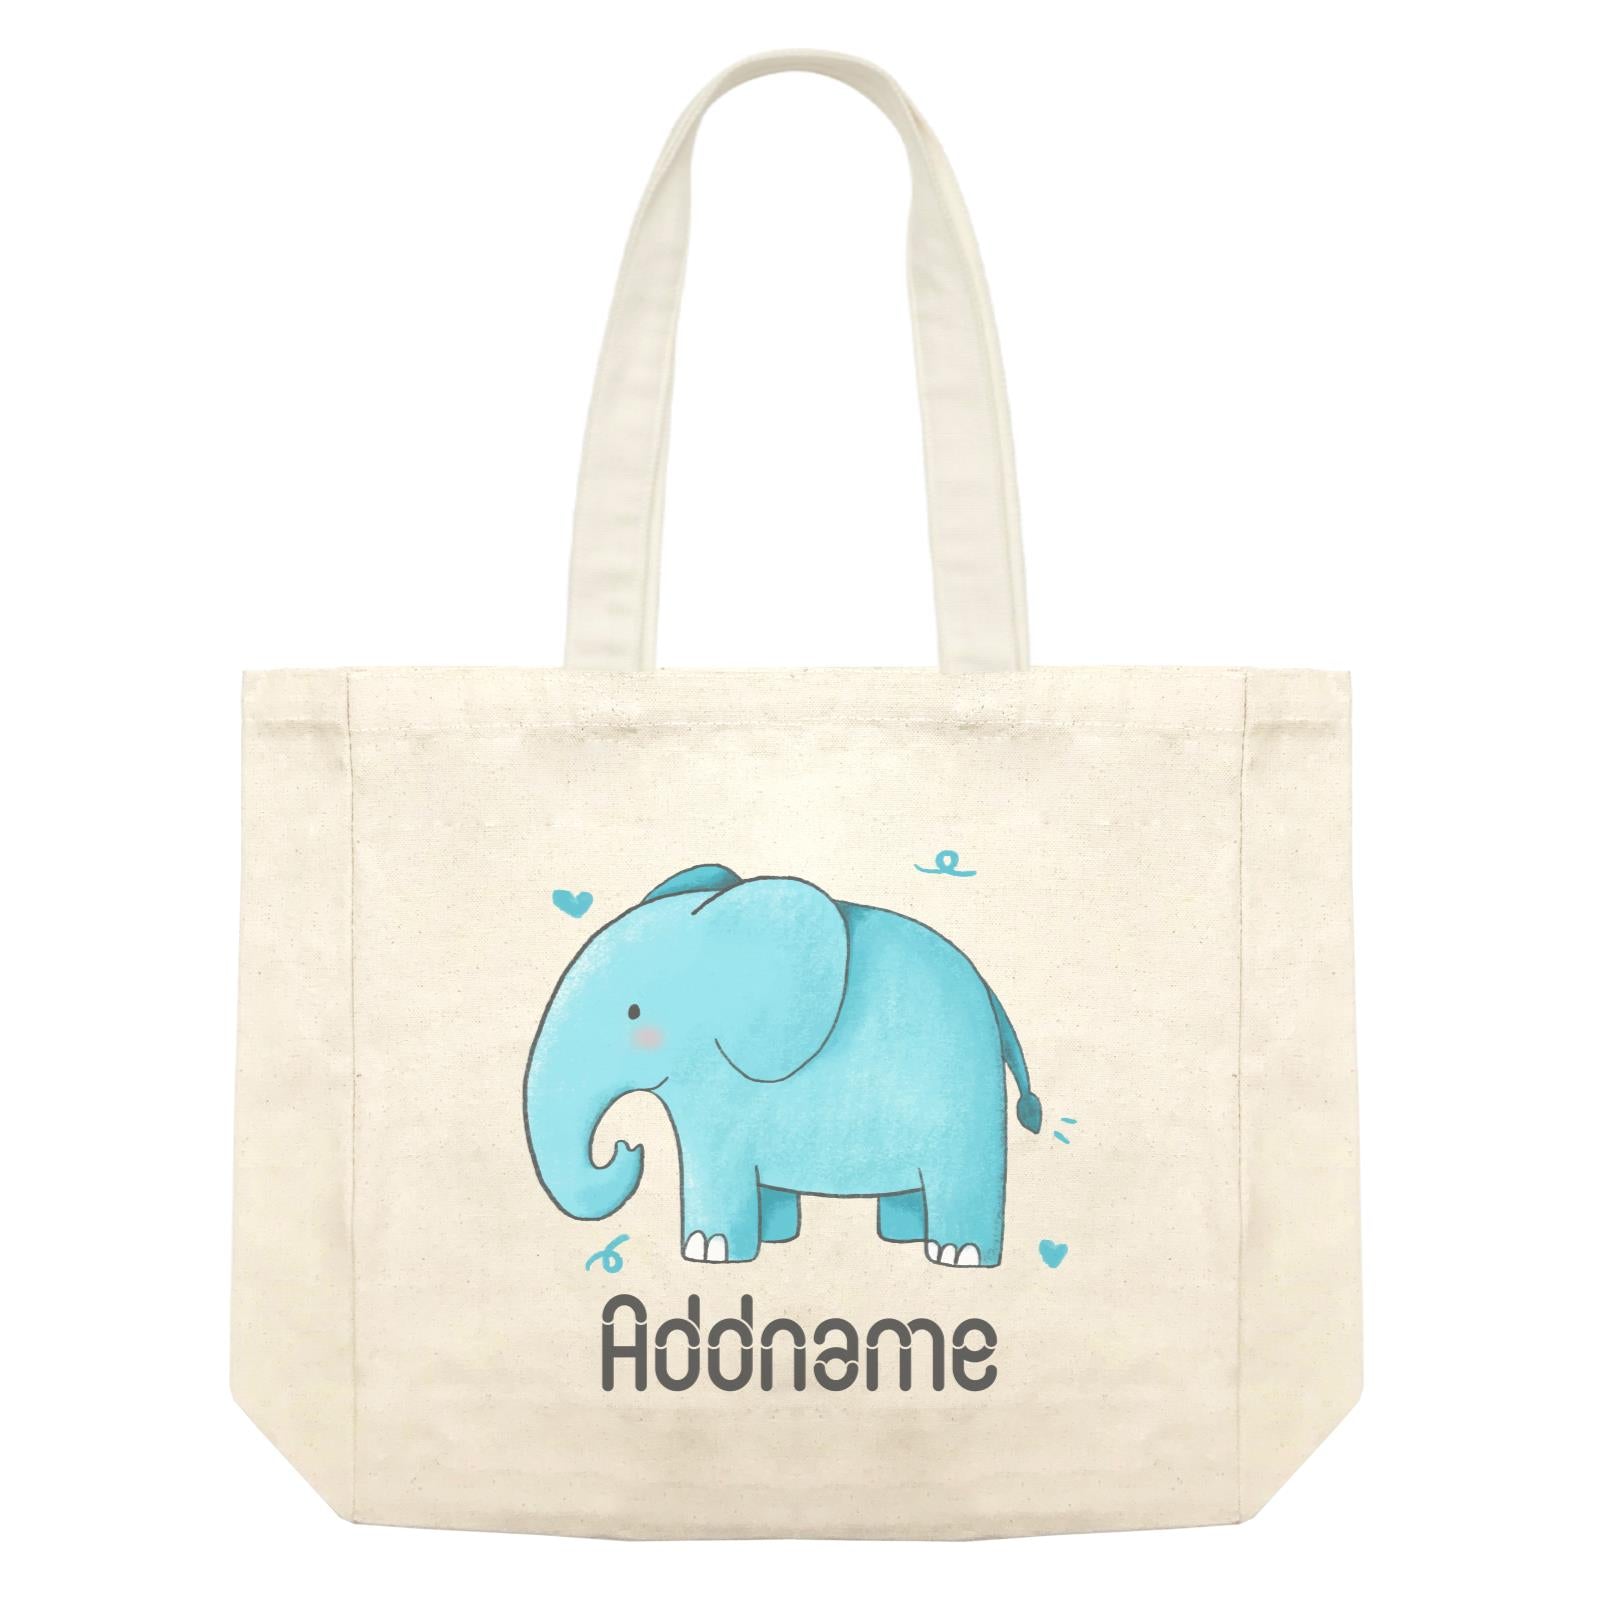 Cute Hand Drawn Style Elephant Addname Shopping Bag